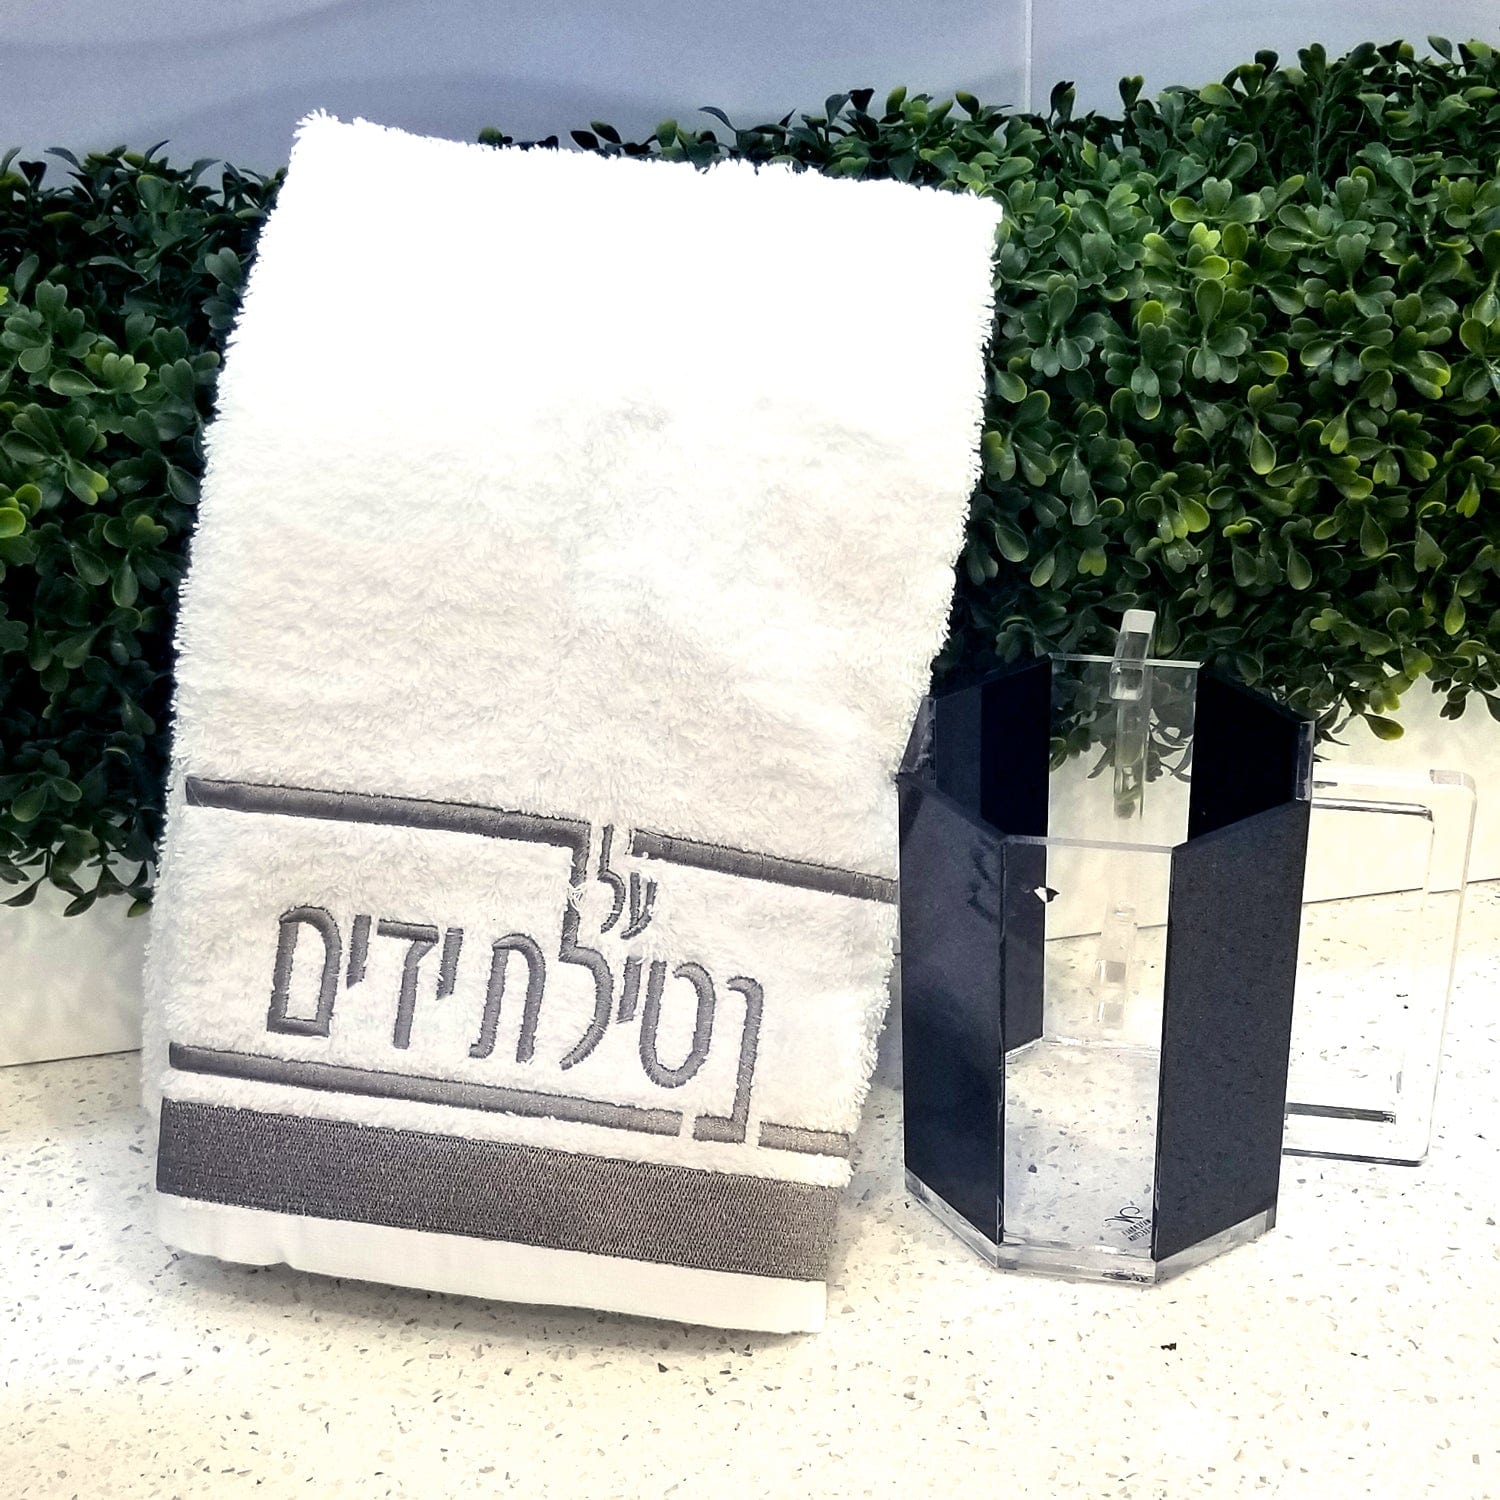 Netilas Yadayim Traditional Hand Towel - Waterdale Collection